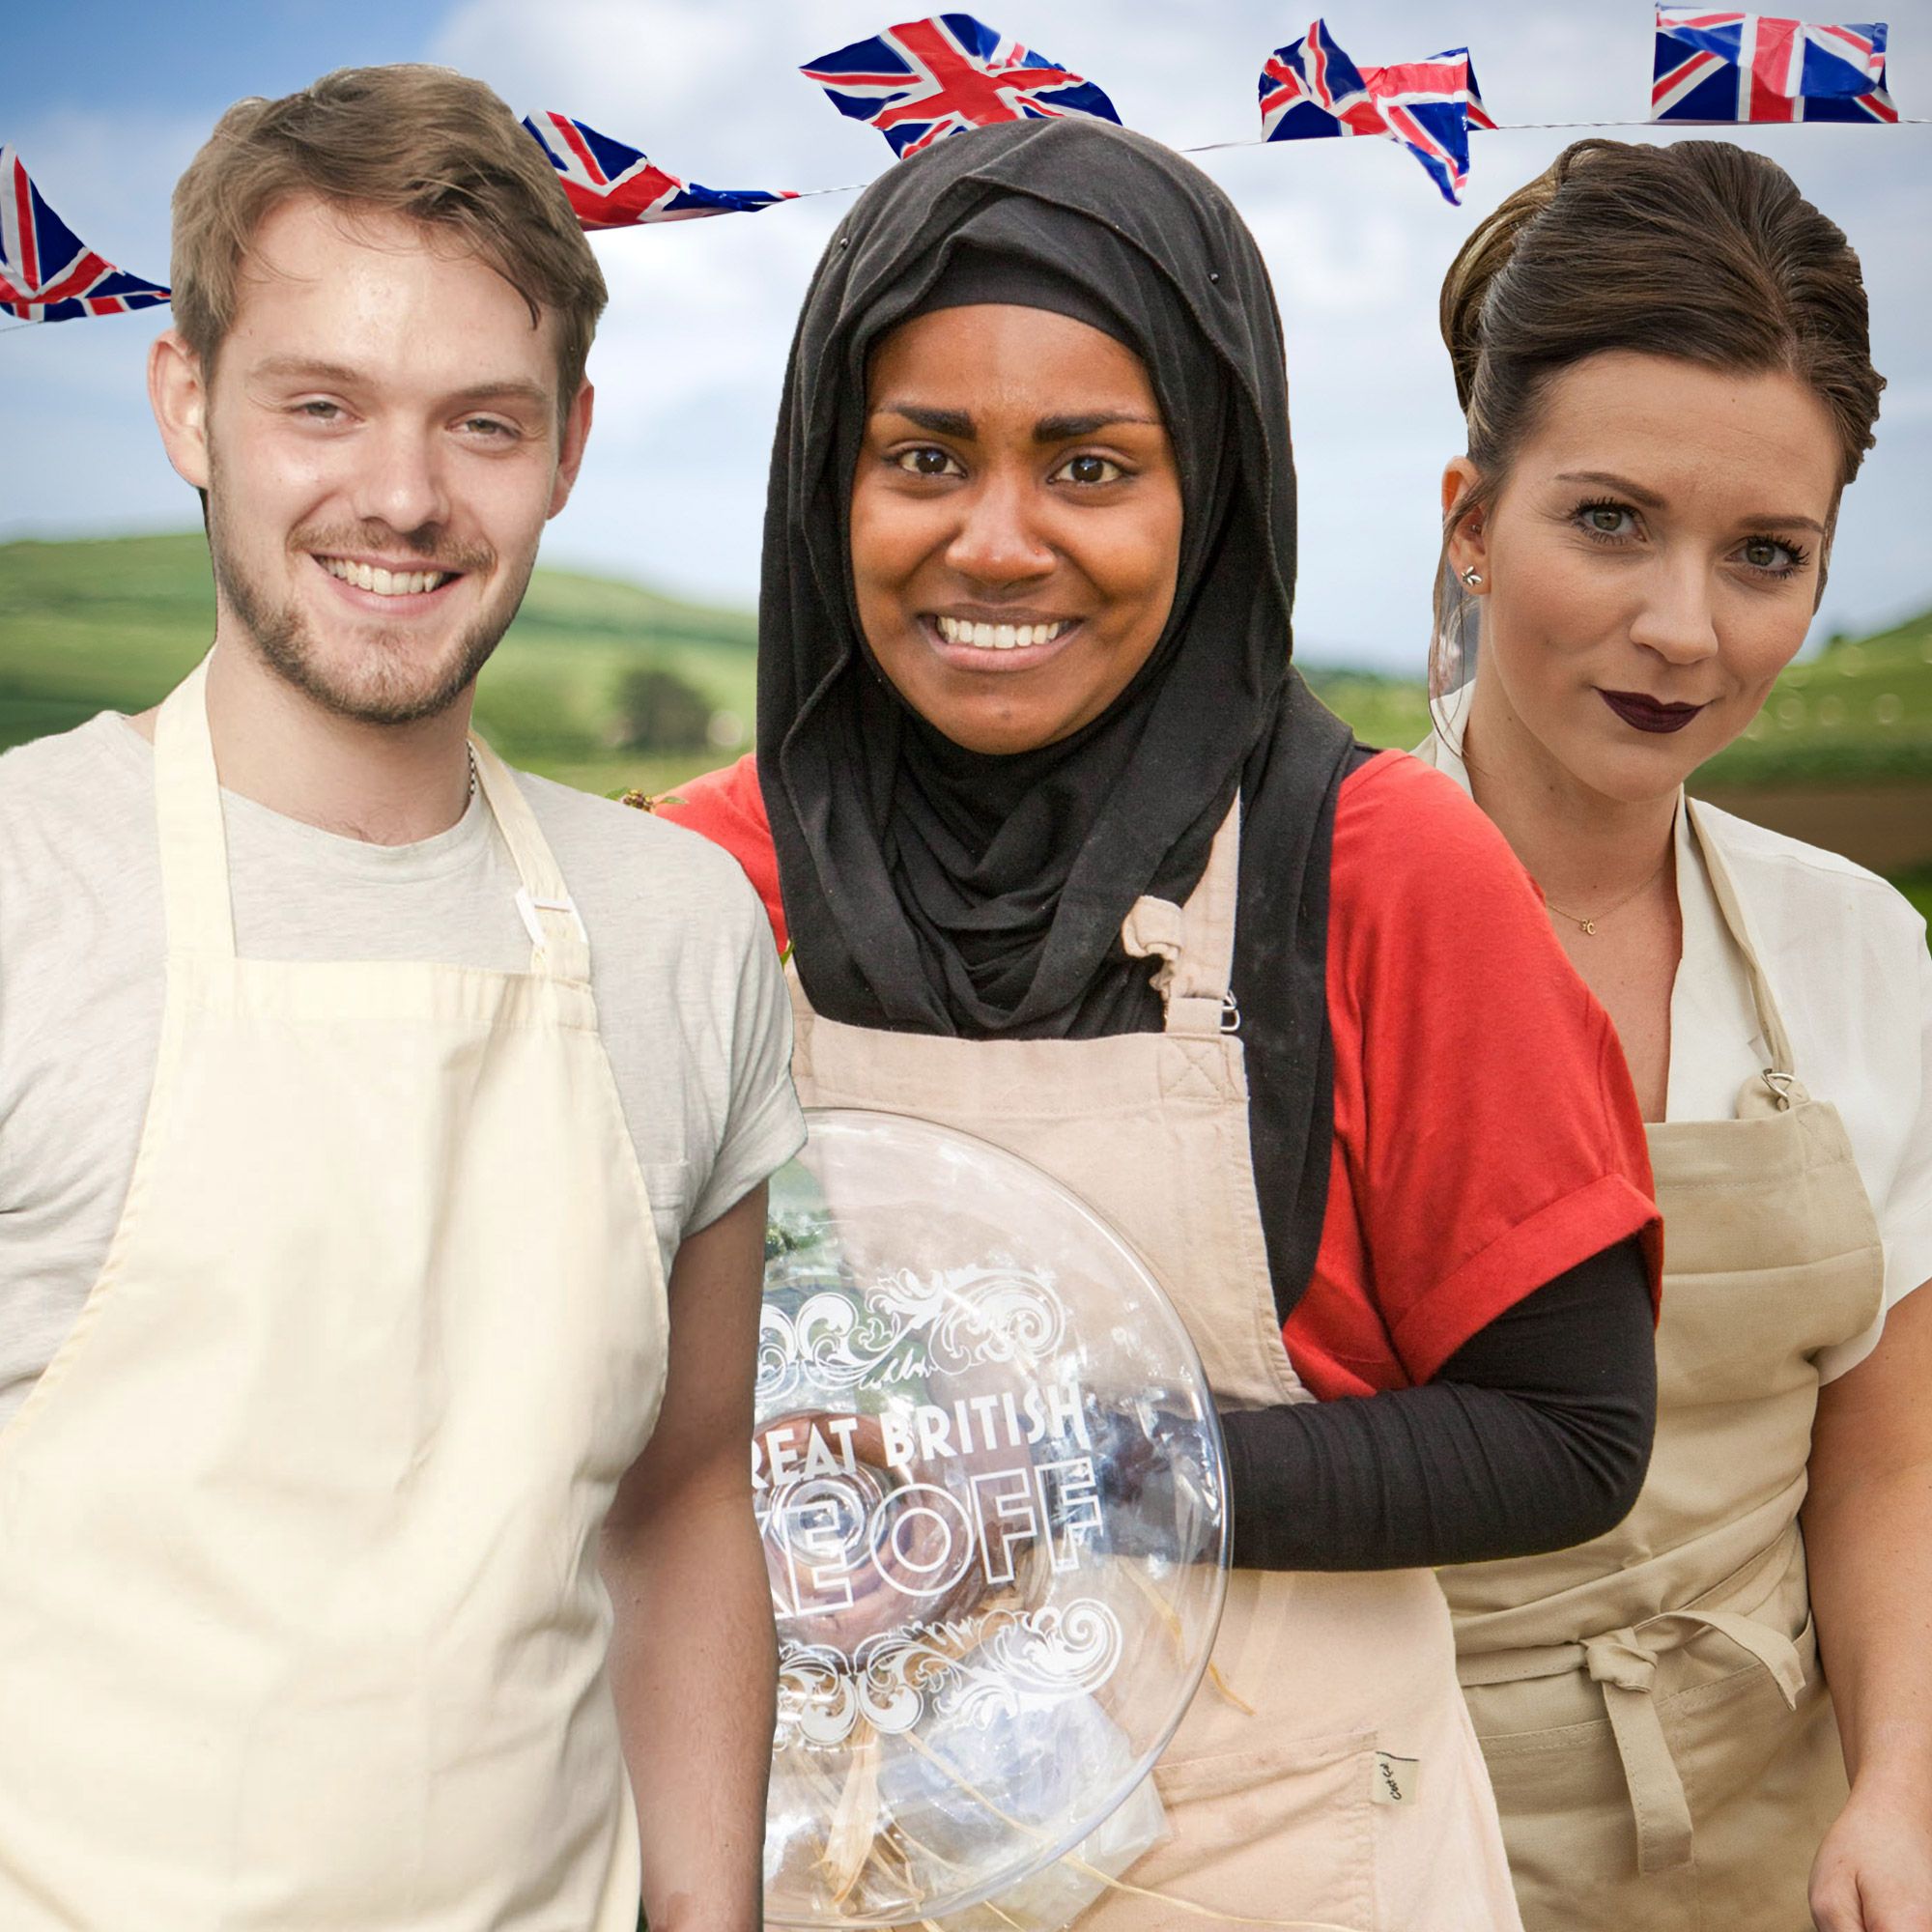 All the Great British Bake Off winners 